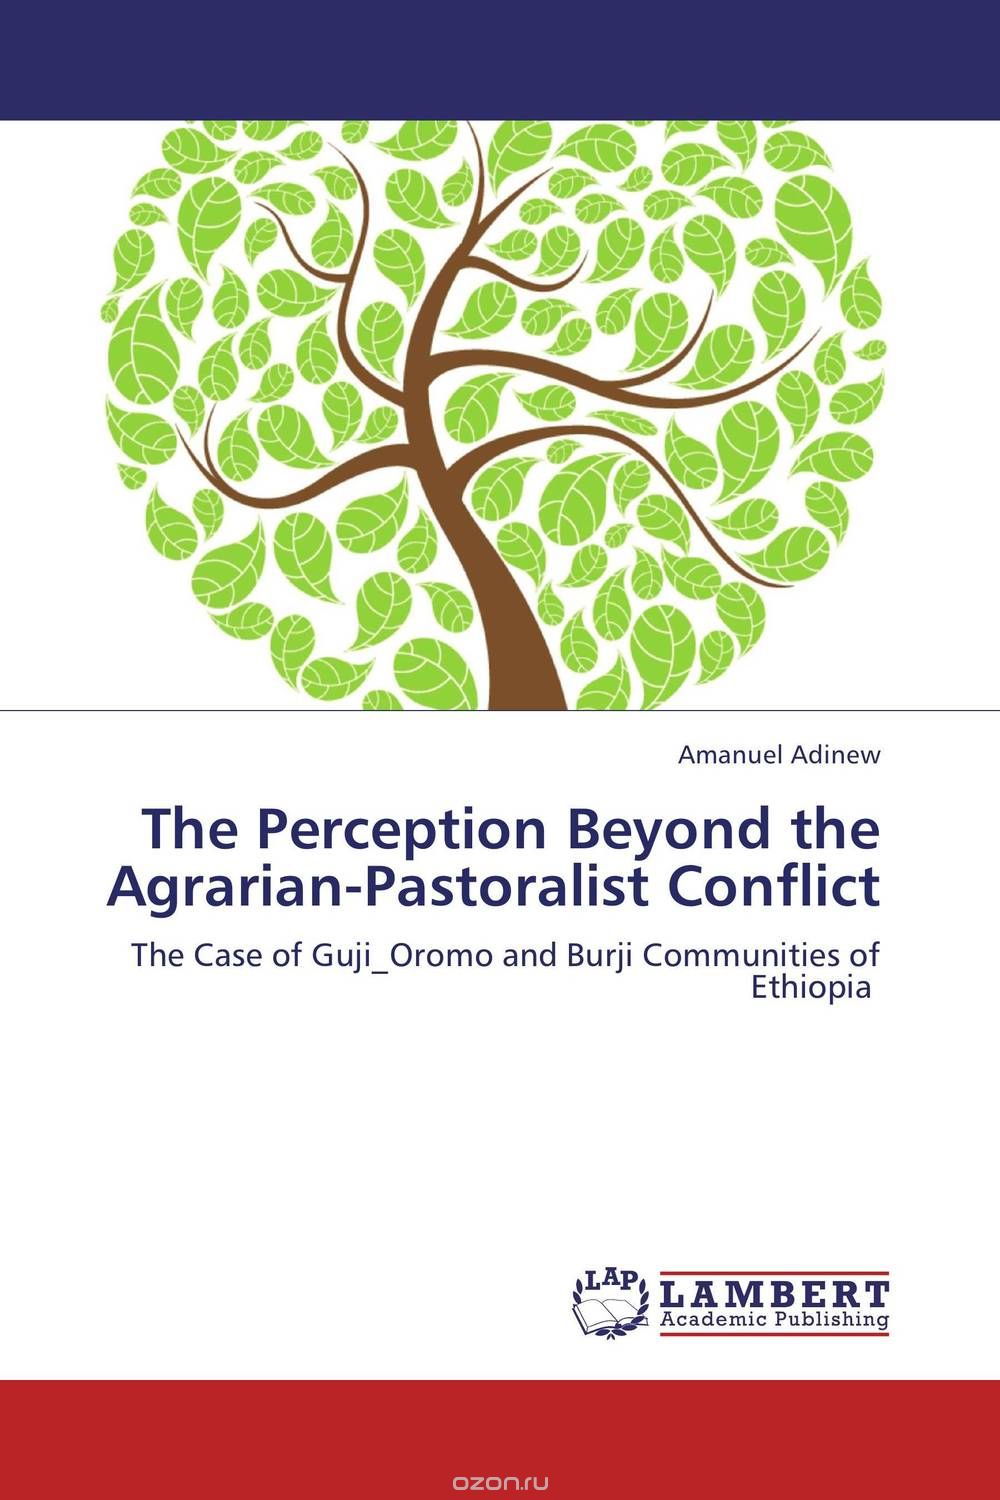 The Perception Beyond the Agrarian-Pastoralist Conflict